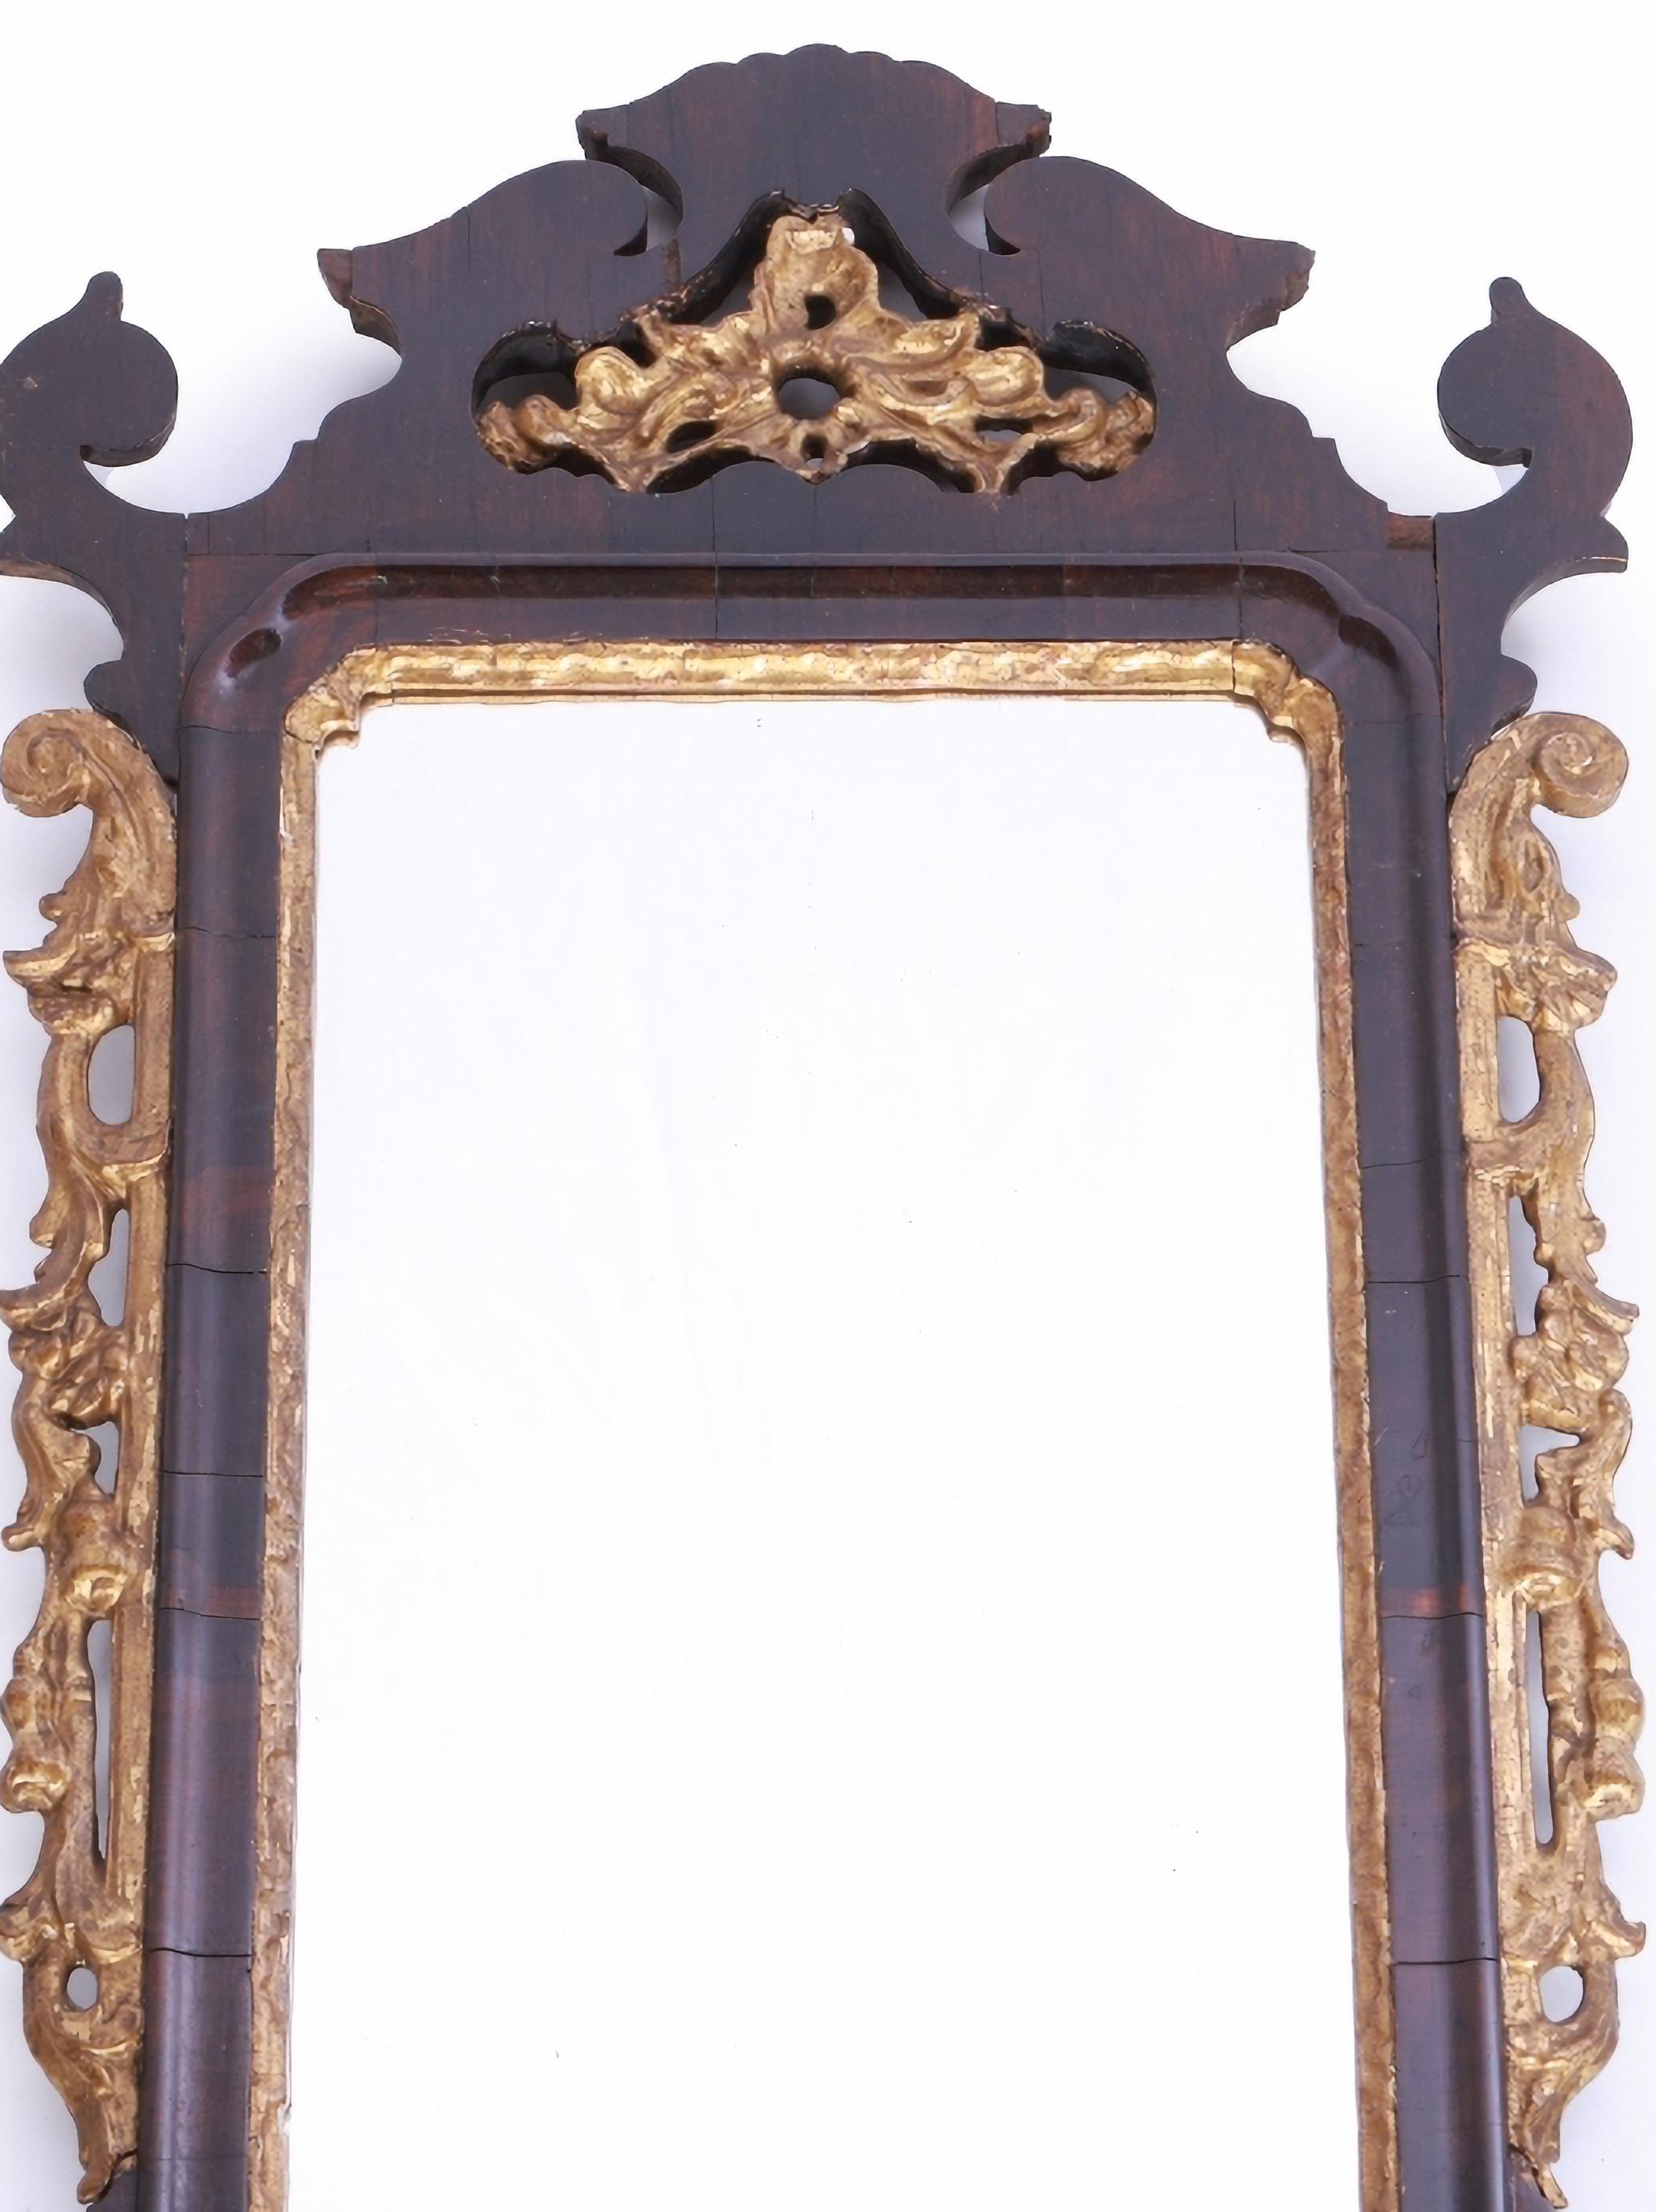 Portuguese mirror
of the 18th century.
Brazilian rosewood frame with gilt carvings. Small defects. Dim.: 79 x 42 cm
Good conditions.